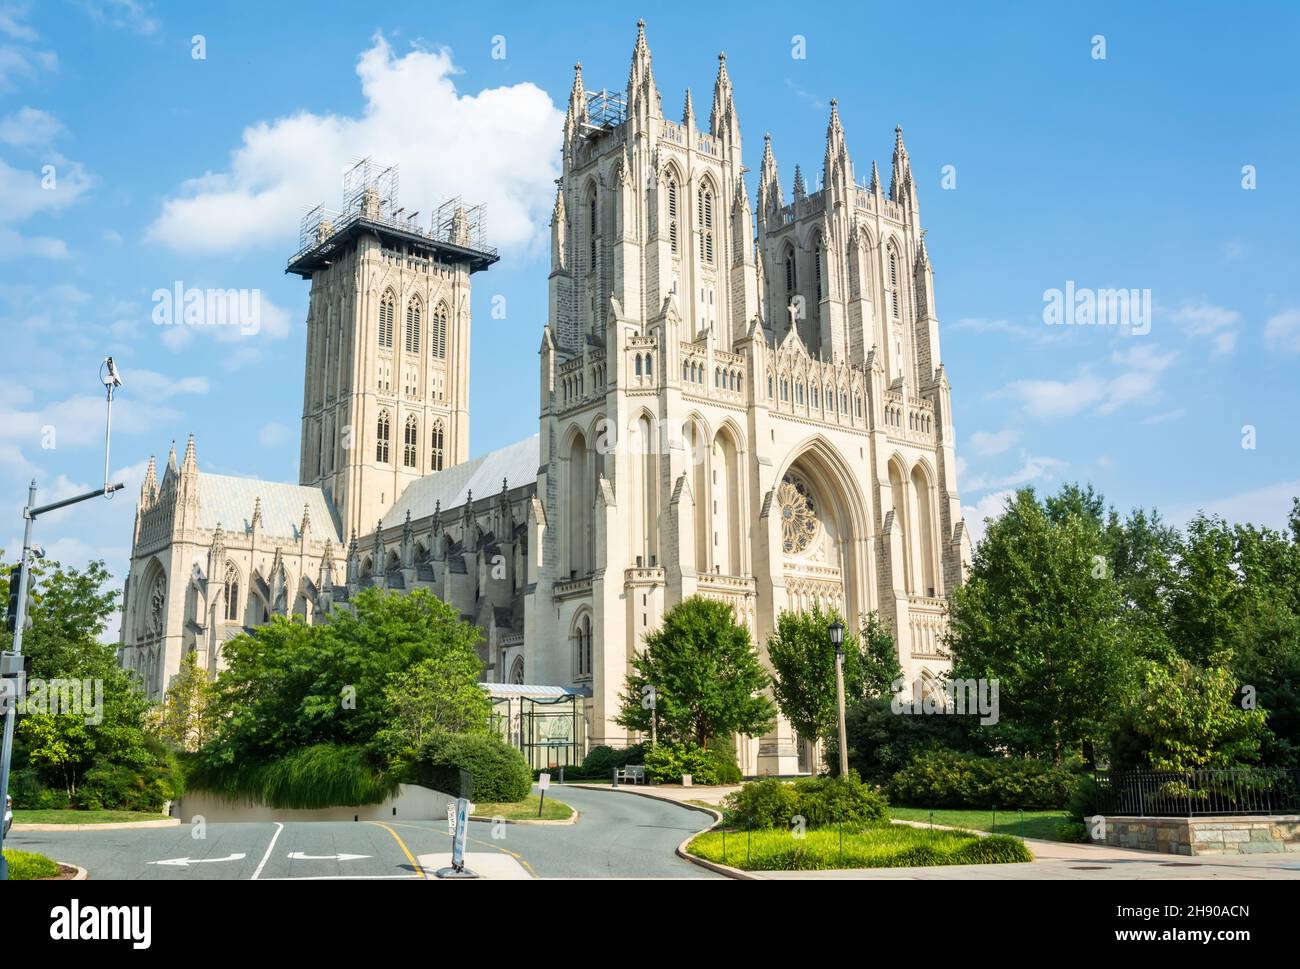 Washington D.C., United States of America – September 7, 2016. Washington National Cathedral (the Cathedral Church of Saint Peter and Saint Paul in th Stock Photo